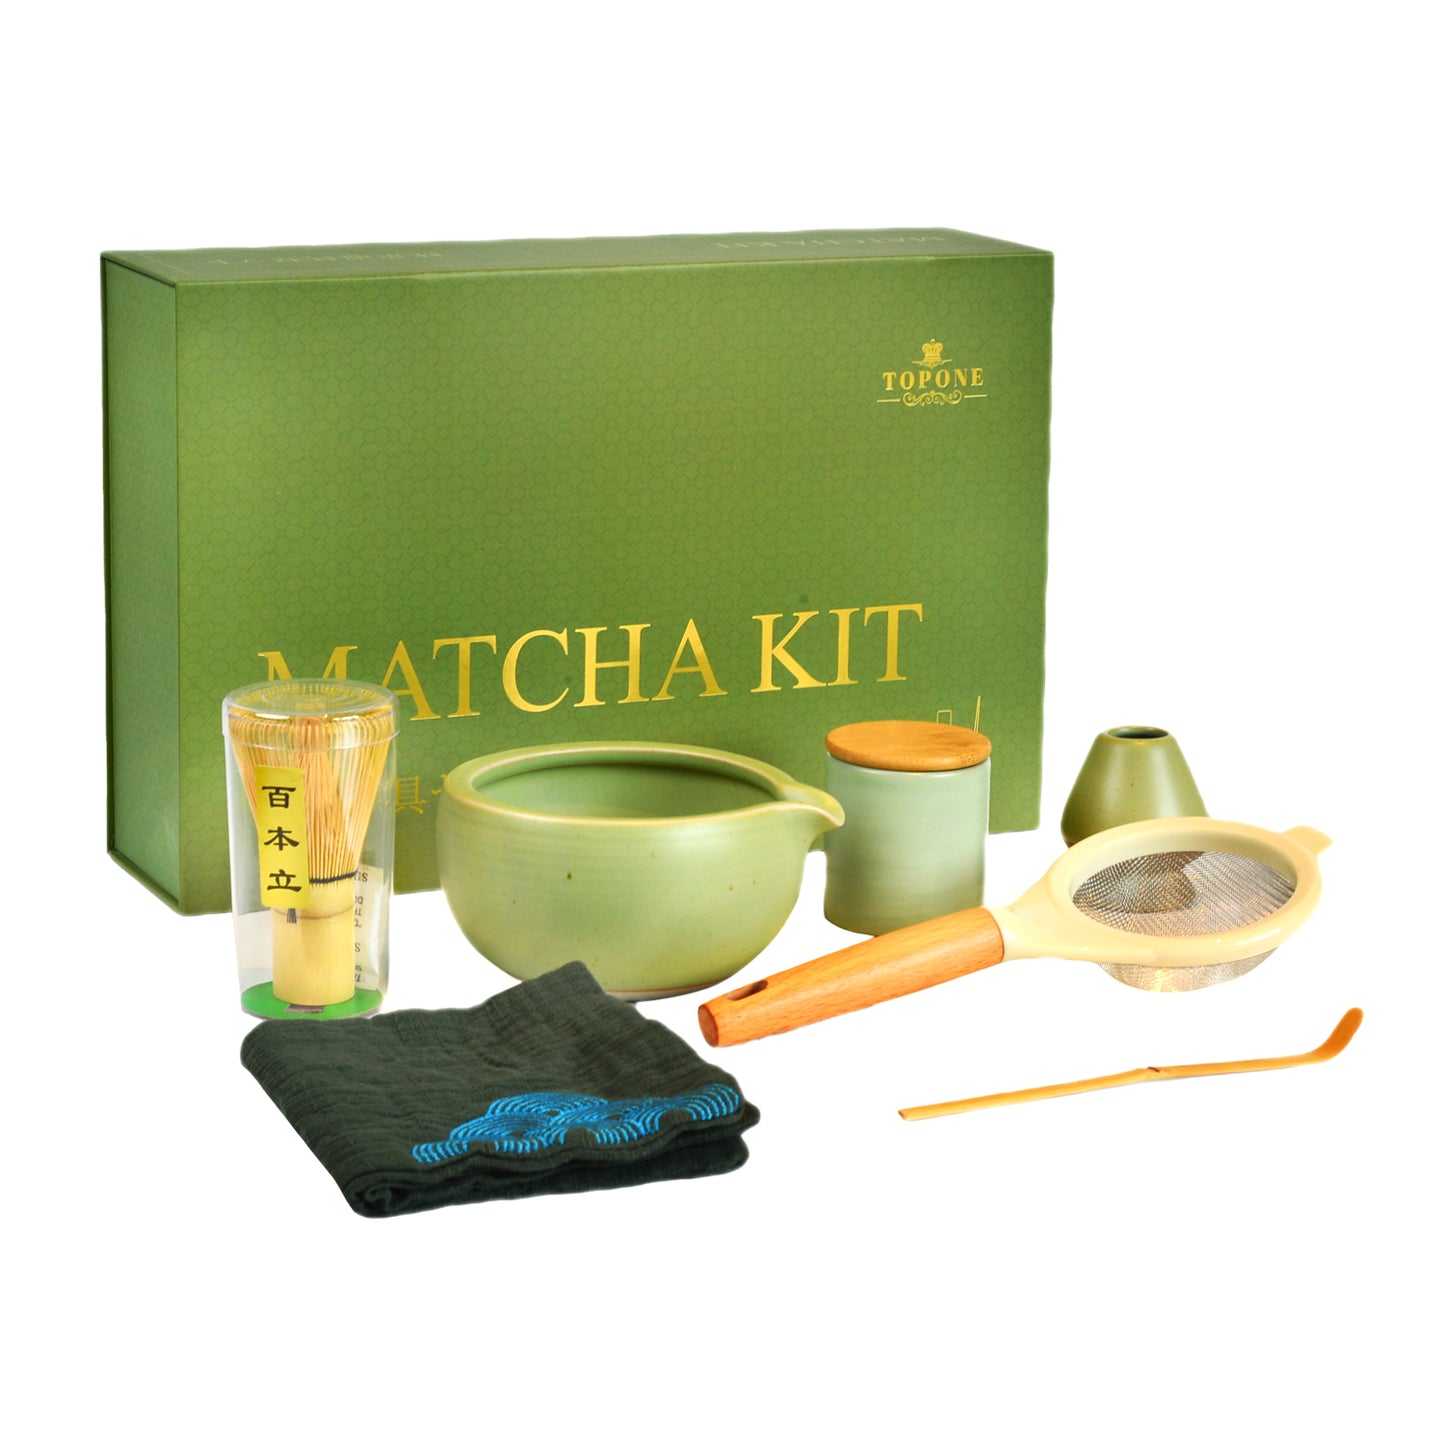 ALL COLOR OPTIONS Matcha Tea Set, Bowl With Spout, Bamboo Whisk